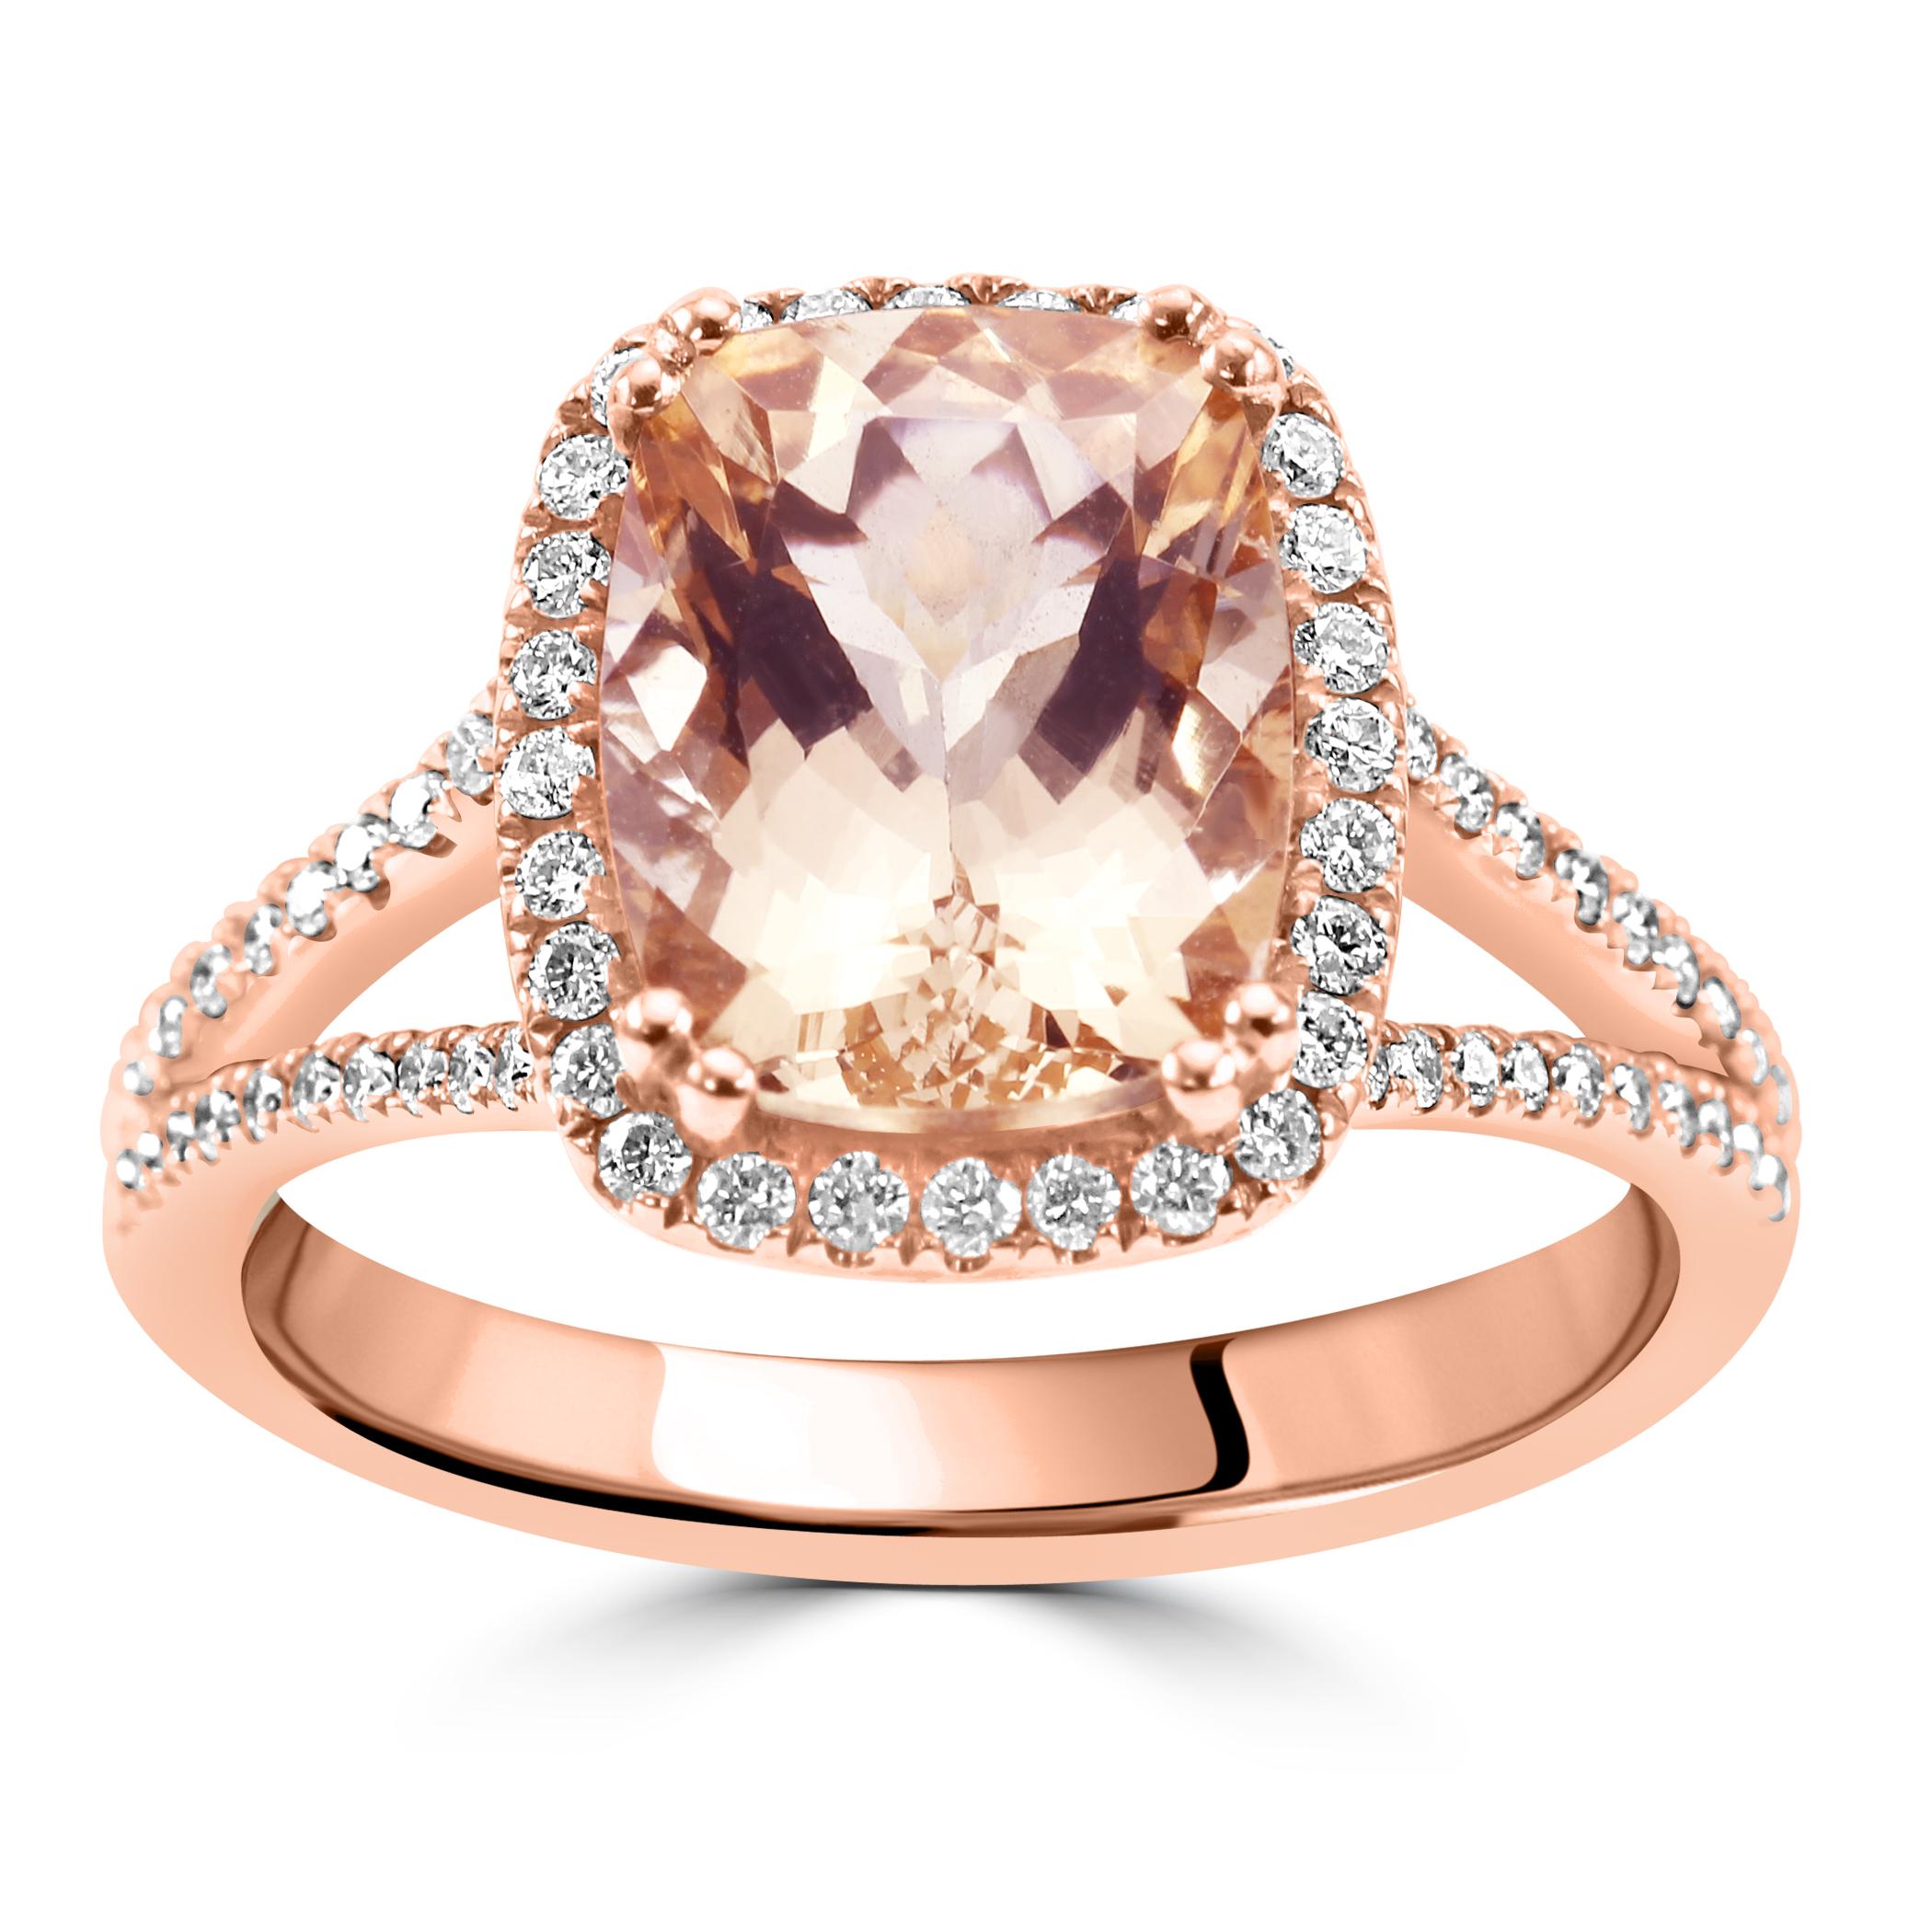 Indulge in the romance of our fashion Morganite engagement ring, a creation that effortlessly combines the warmth of 14K Rose Gold with the ethereal beauty of gemstones.

The centerpiece of this enchanting ring is the cushion-shaped Morganite,